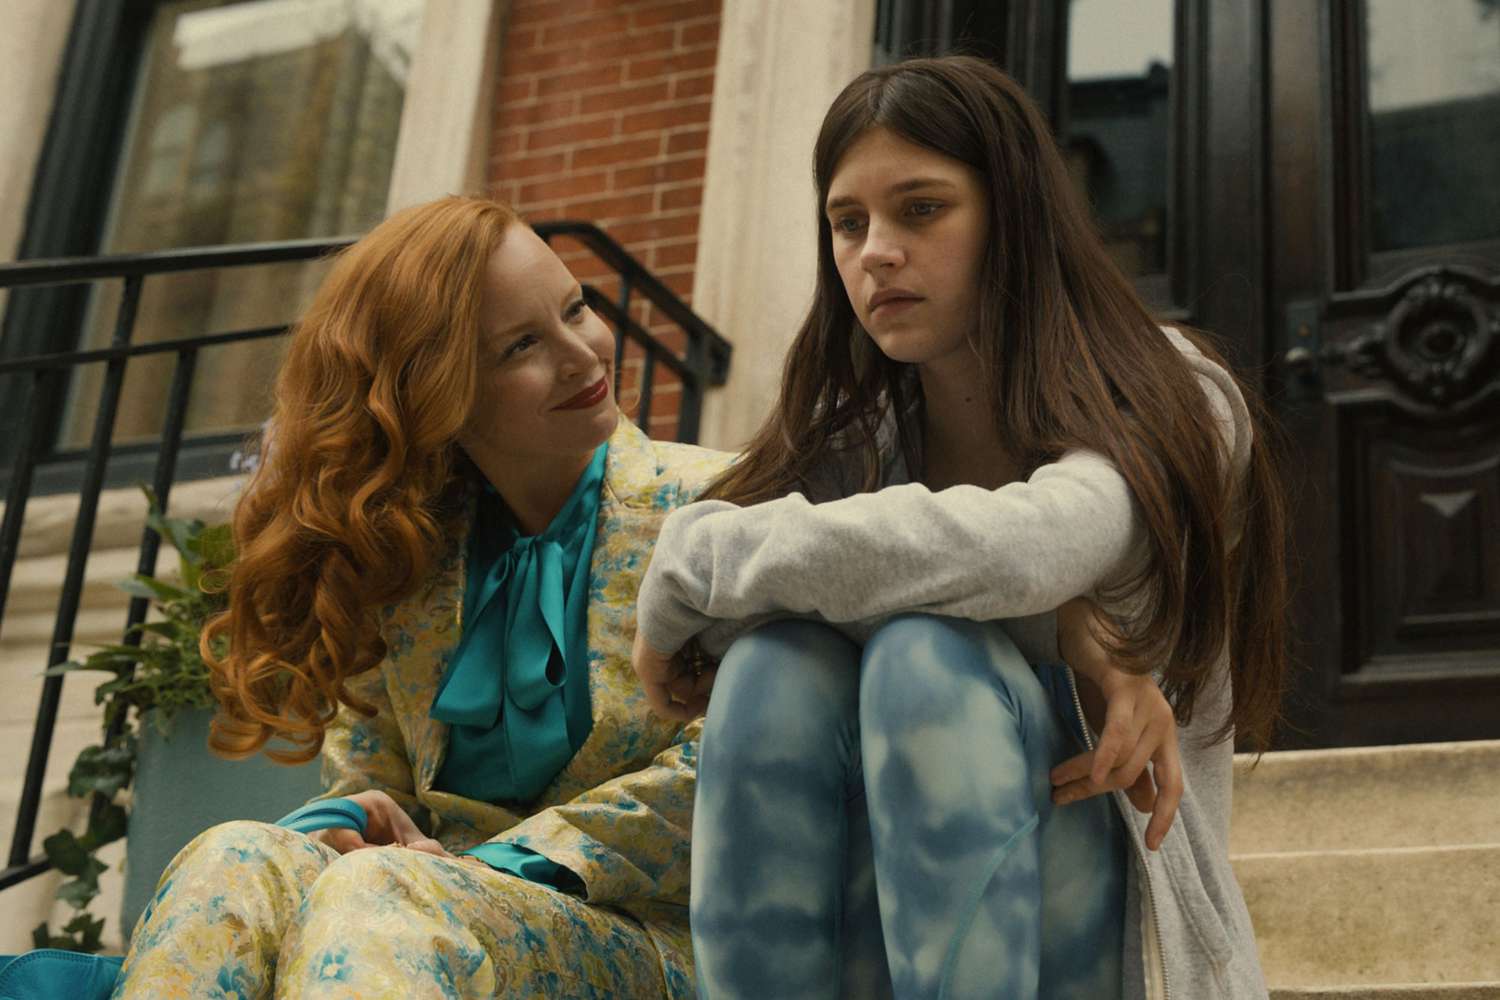 Lauren Ambrose and Nell Tiger Free in “Servant,” now streaming on Apple TV+. S3, E4 Ring